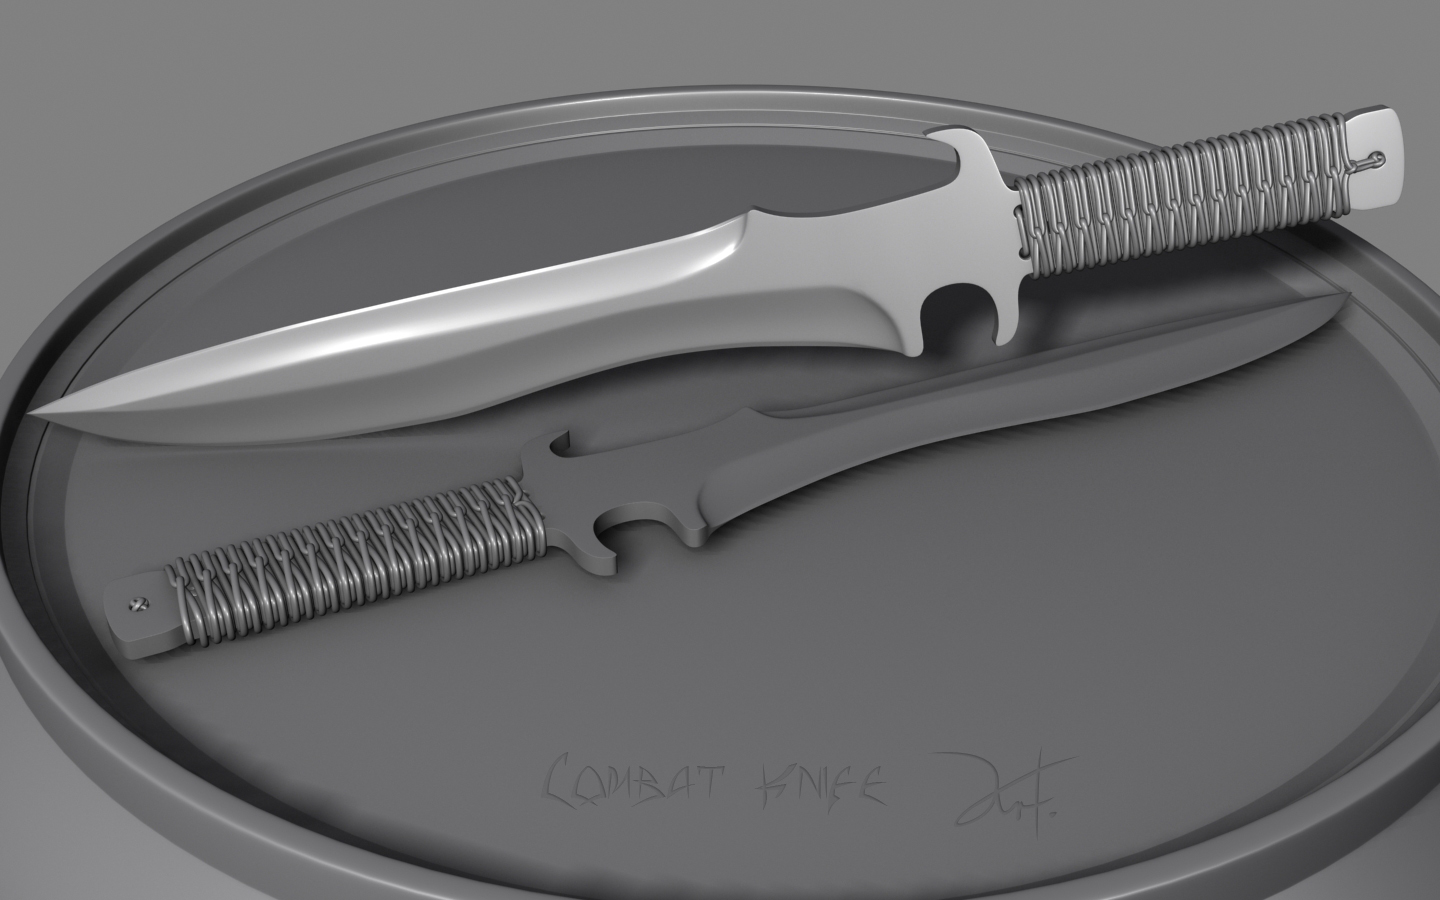 Combat_Knife_by_The_5.jpg